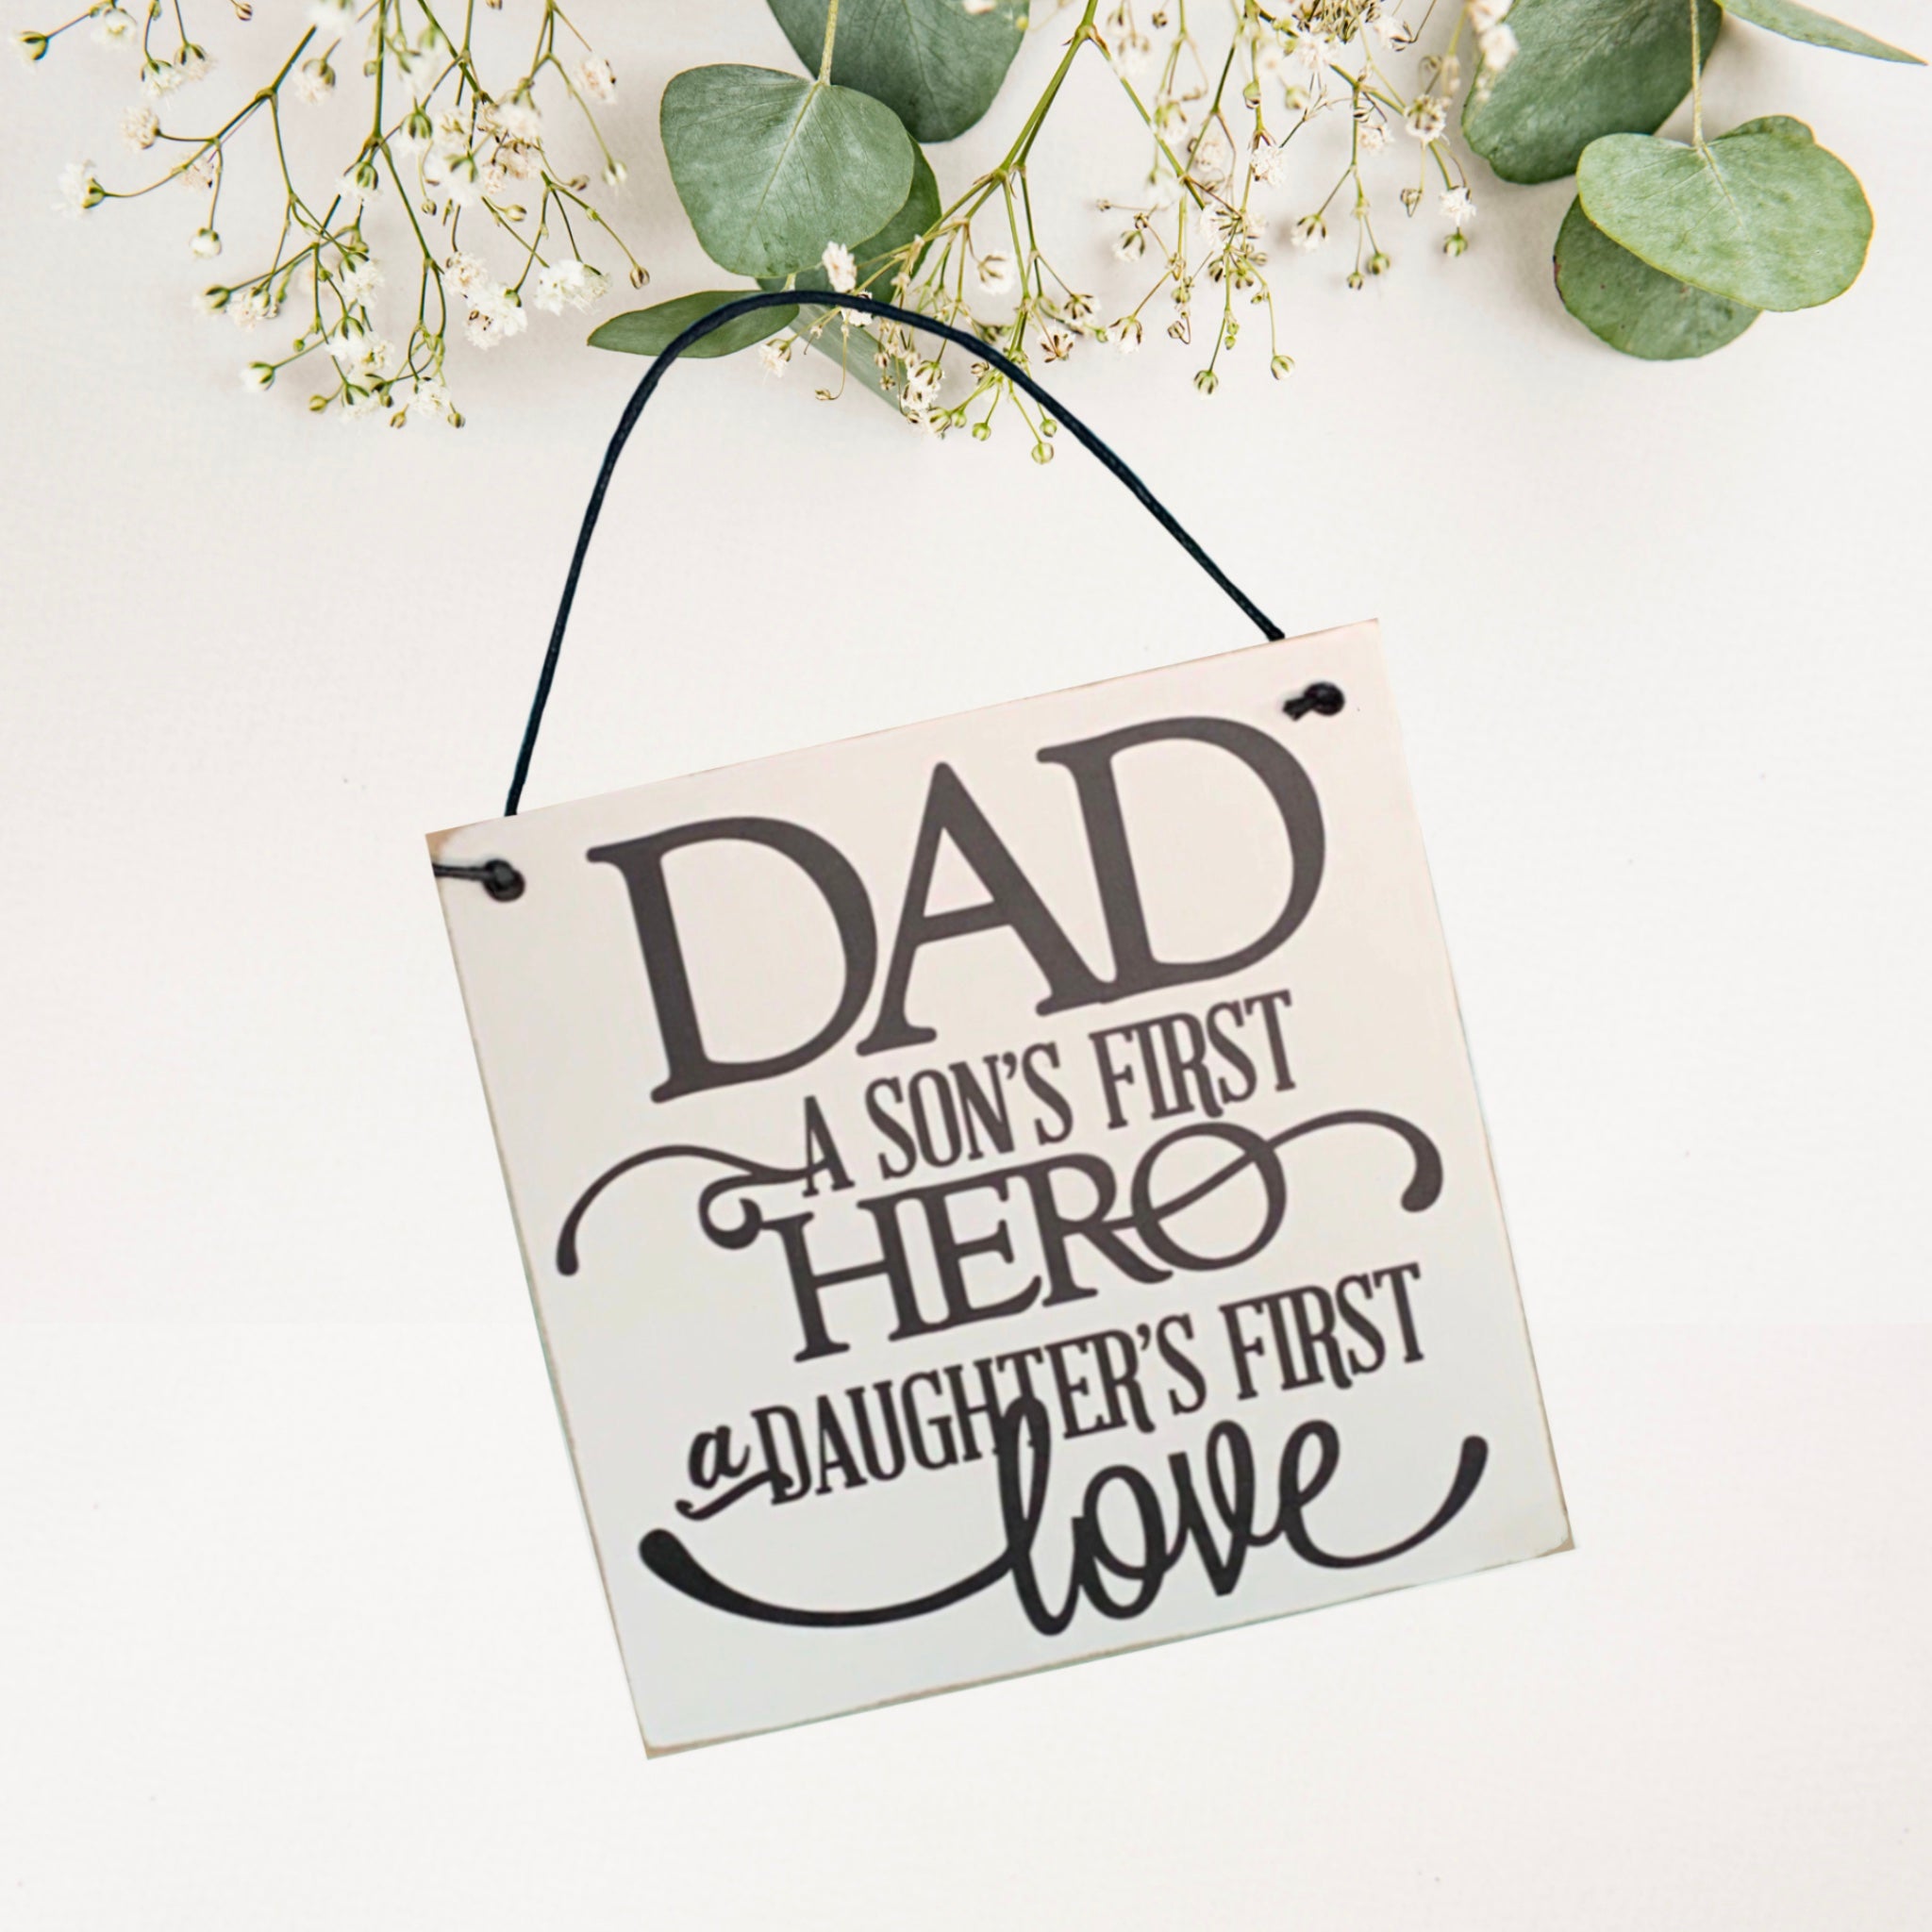 Dad A Son’s first Hero A Daughter’s first Love | 15cm x 15cm Sign | wall plaque